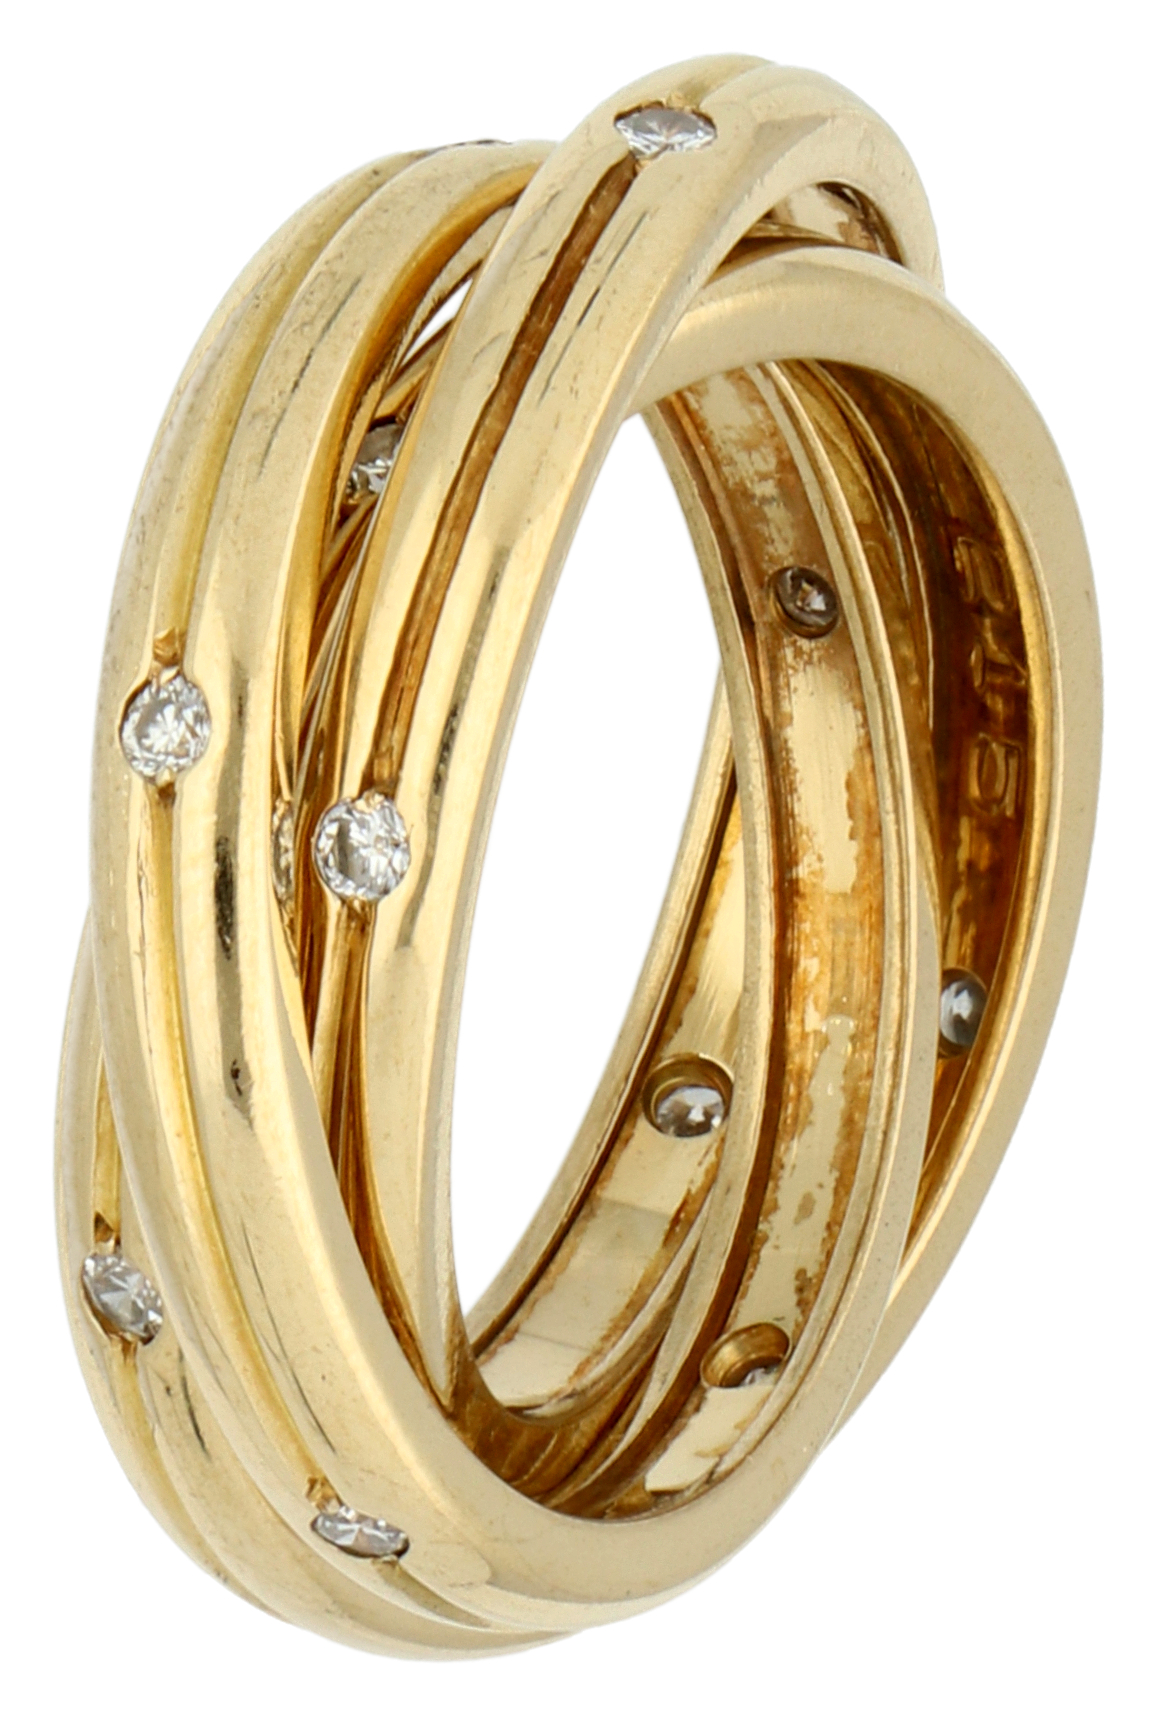 No Reserve - Cartier 18K yellow gold 'constellation trinity triple' ring set with approx. 0.30 ct. d - Image 2 of 4